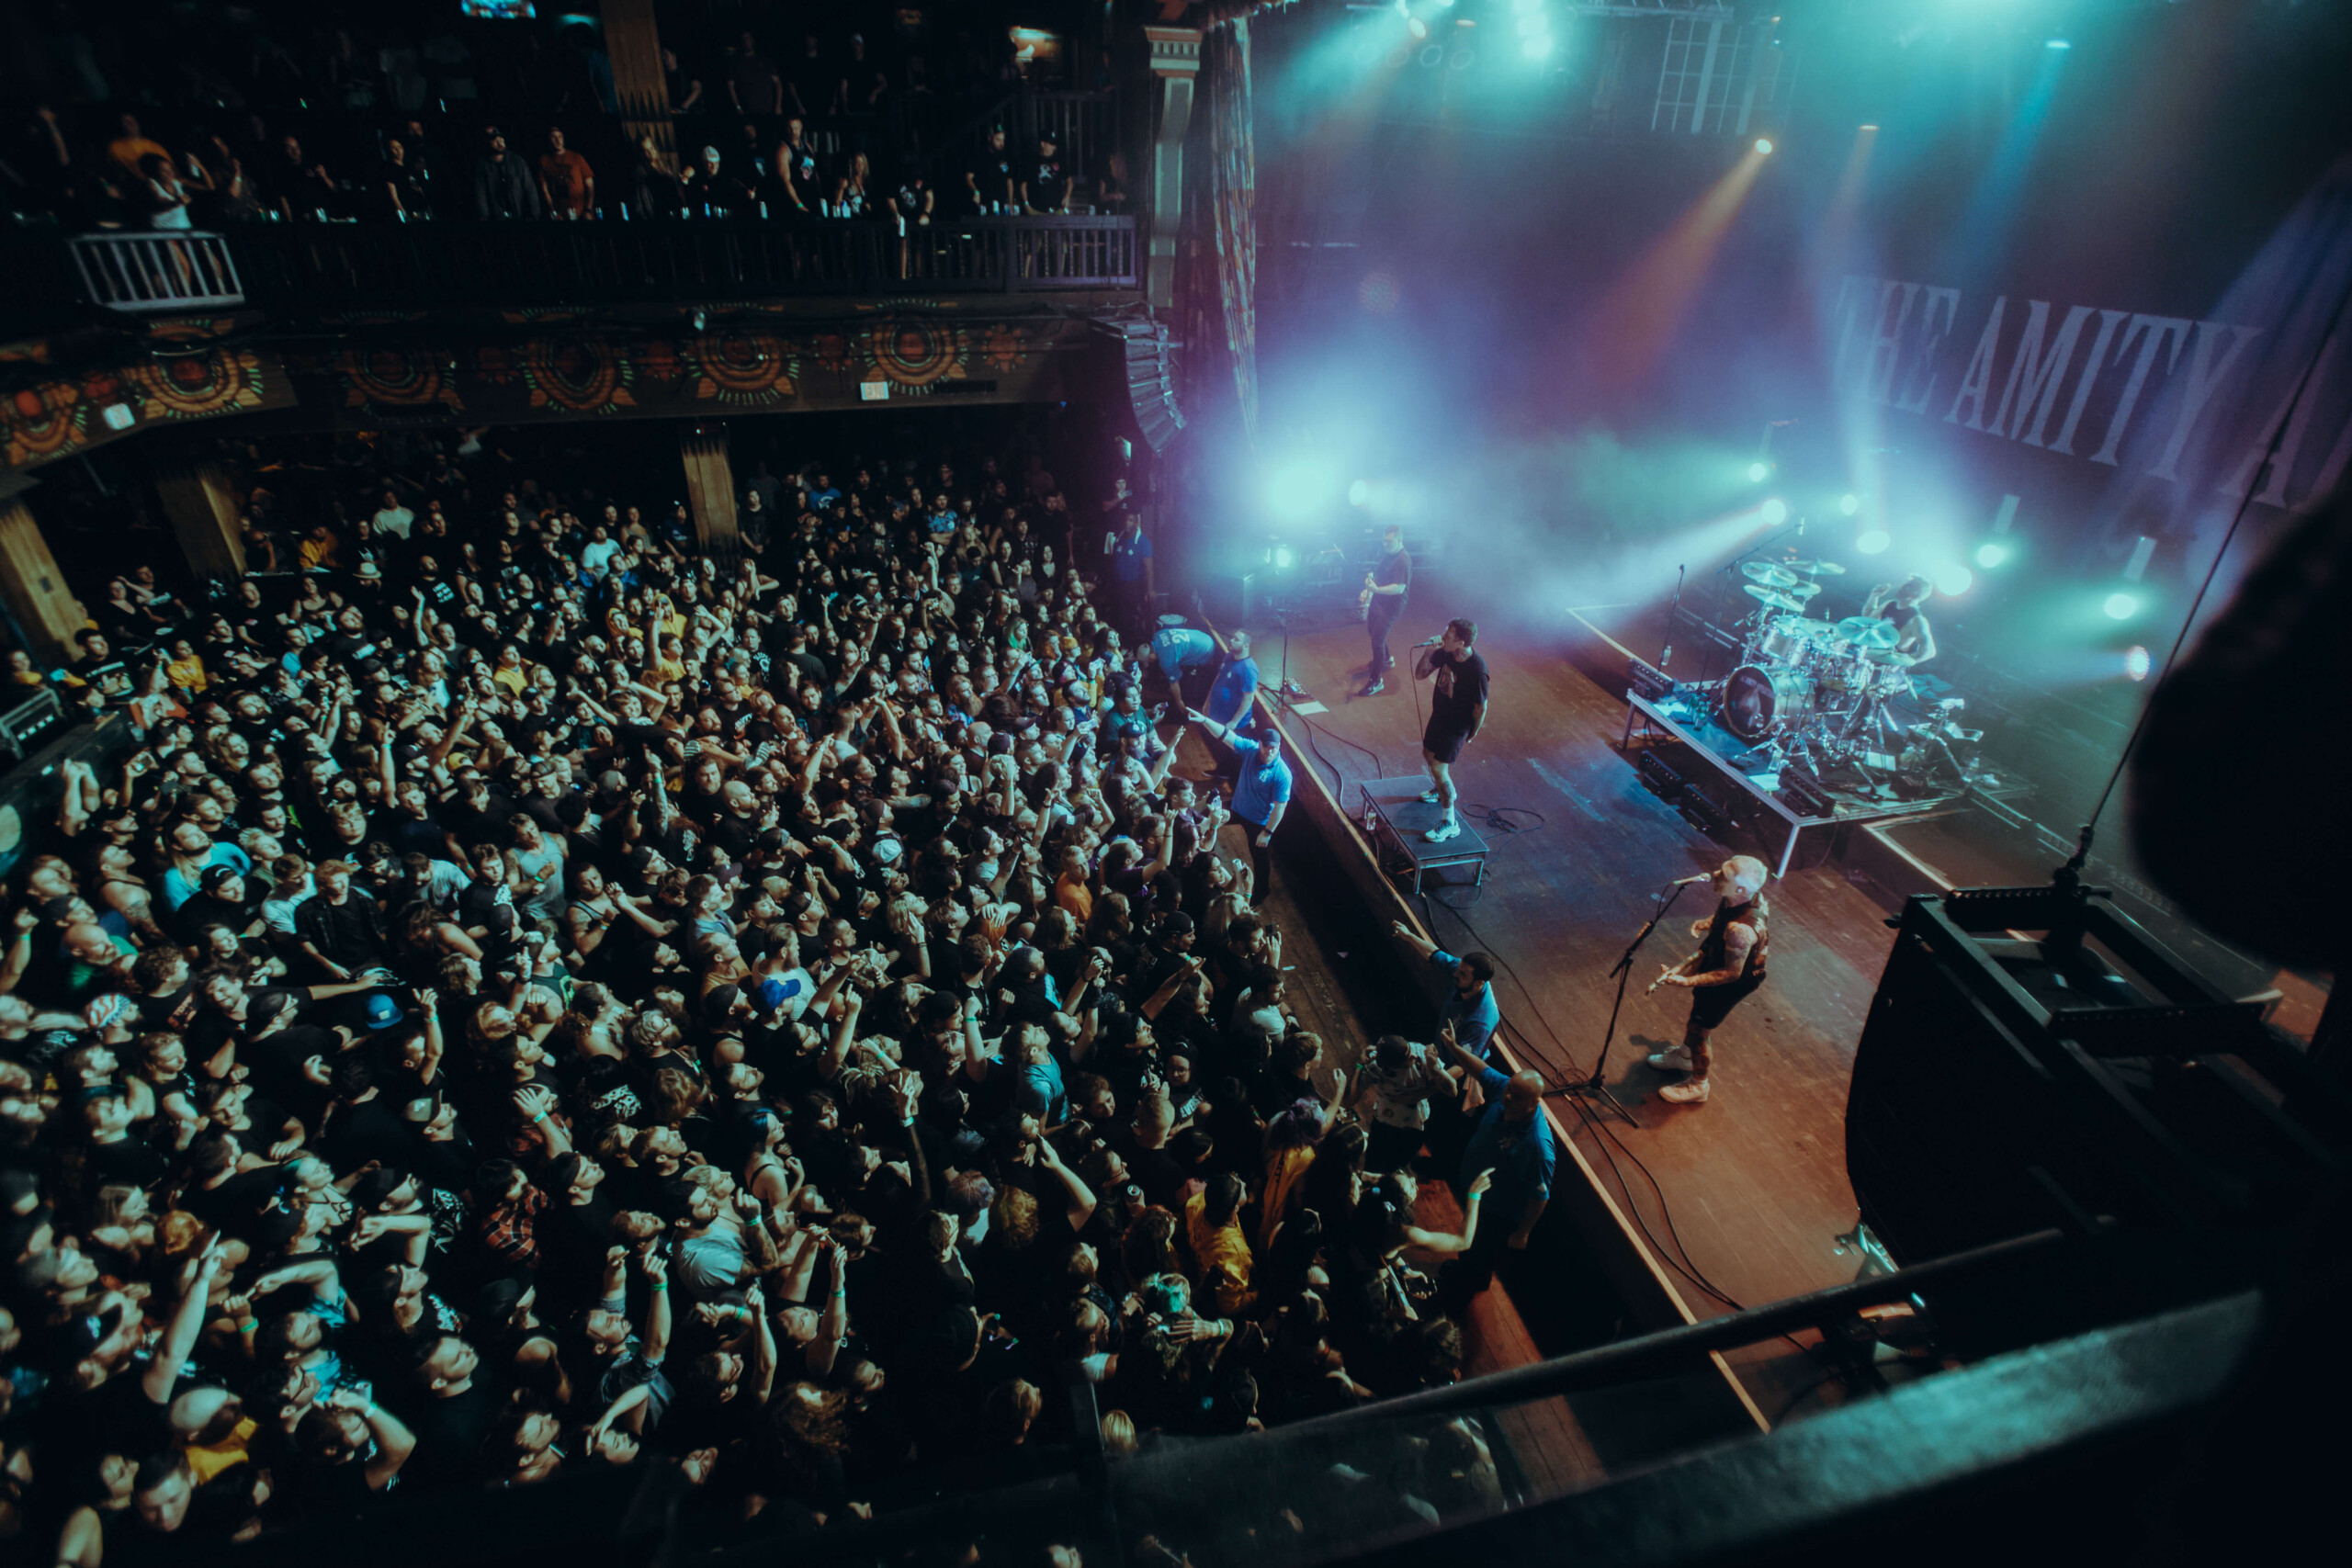 GALLERY: The Amity Affliction & Silverstein ‘Co-Headline North American Tour’ With Holding Absence & UnityTX – Orlando, FL – 9.14.22